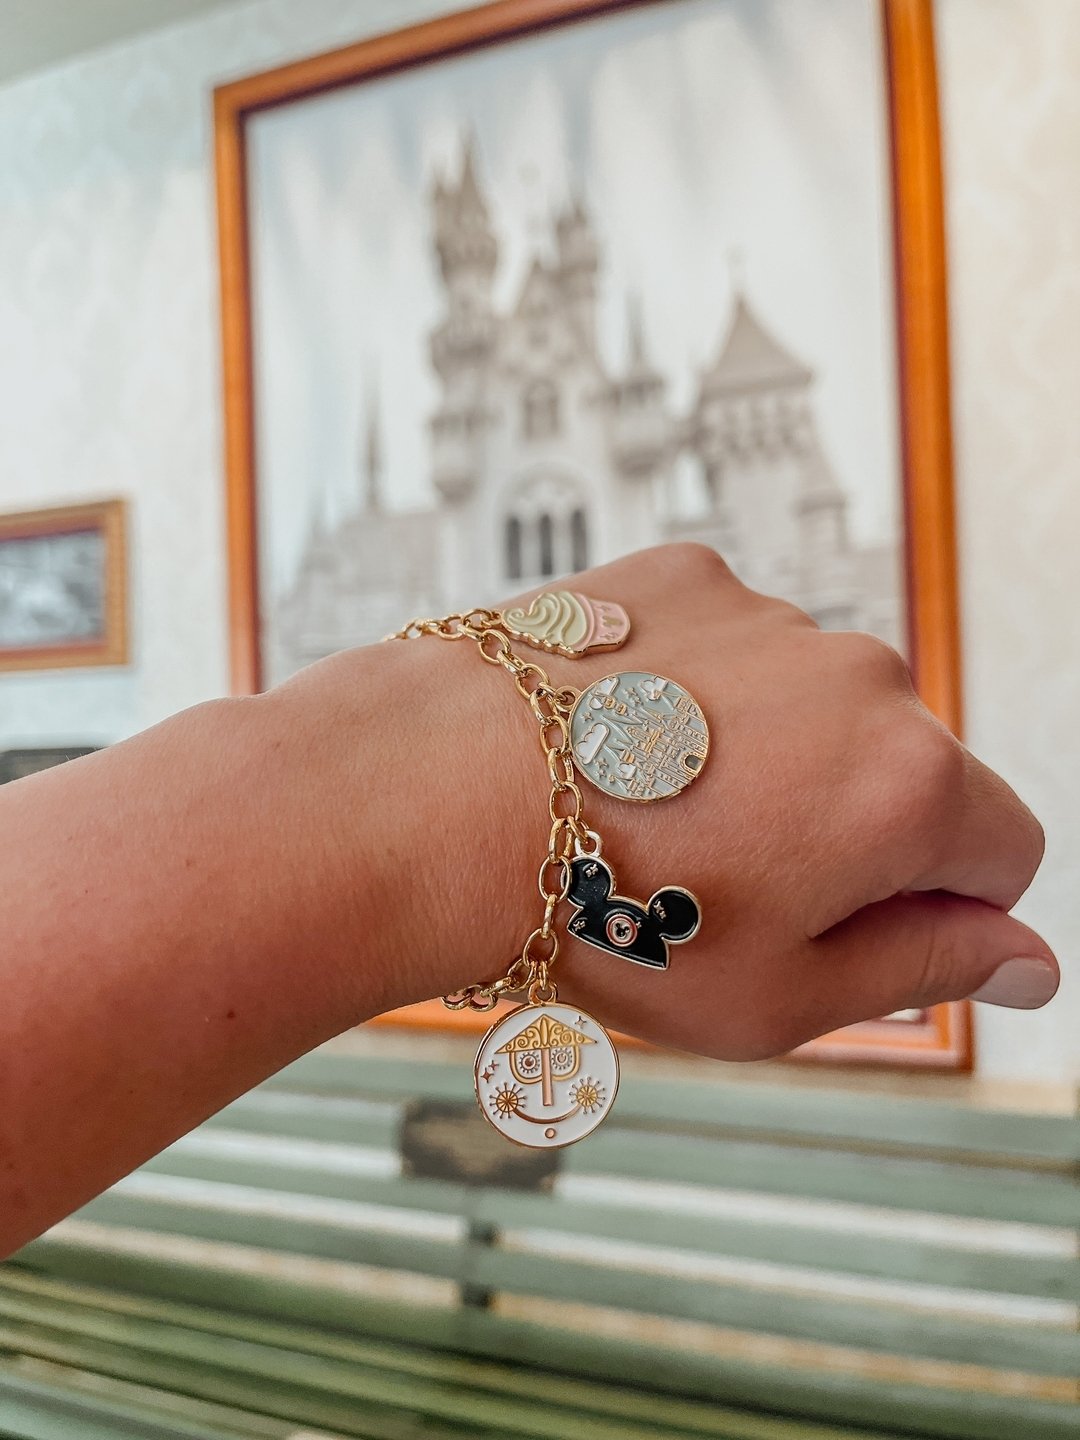 Charm bracelets were the biggest deal when I was a kid and I always loved the bit of personality that came through in the charms each person chose. I love that now I get to create that but a Disney parks version! Choose your own charms to create the 